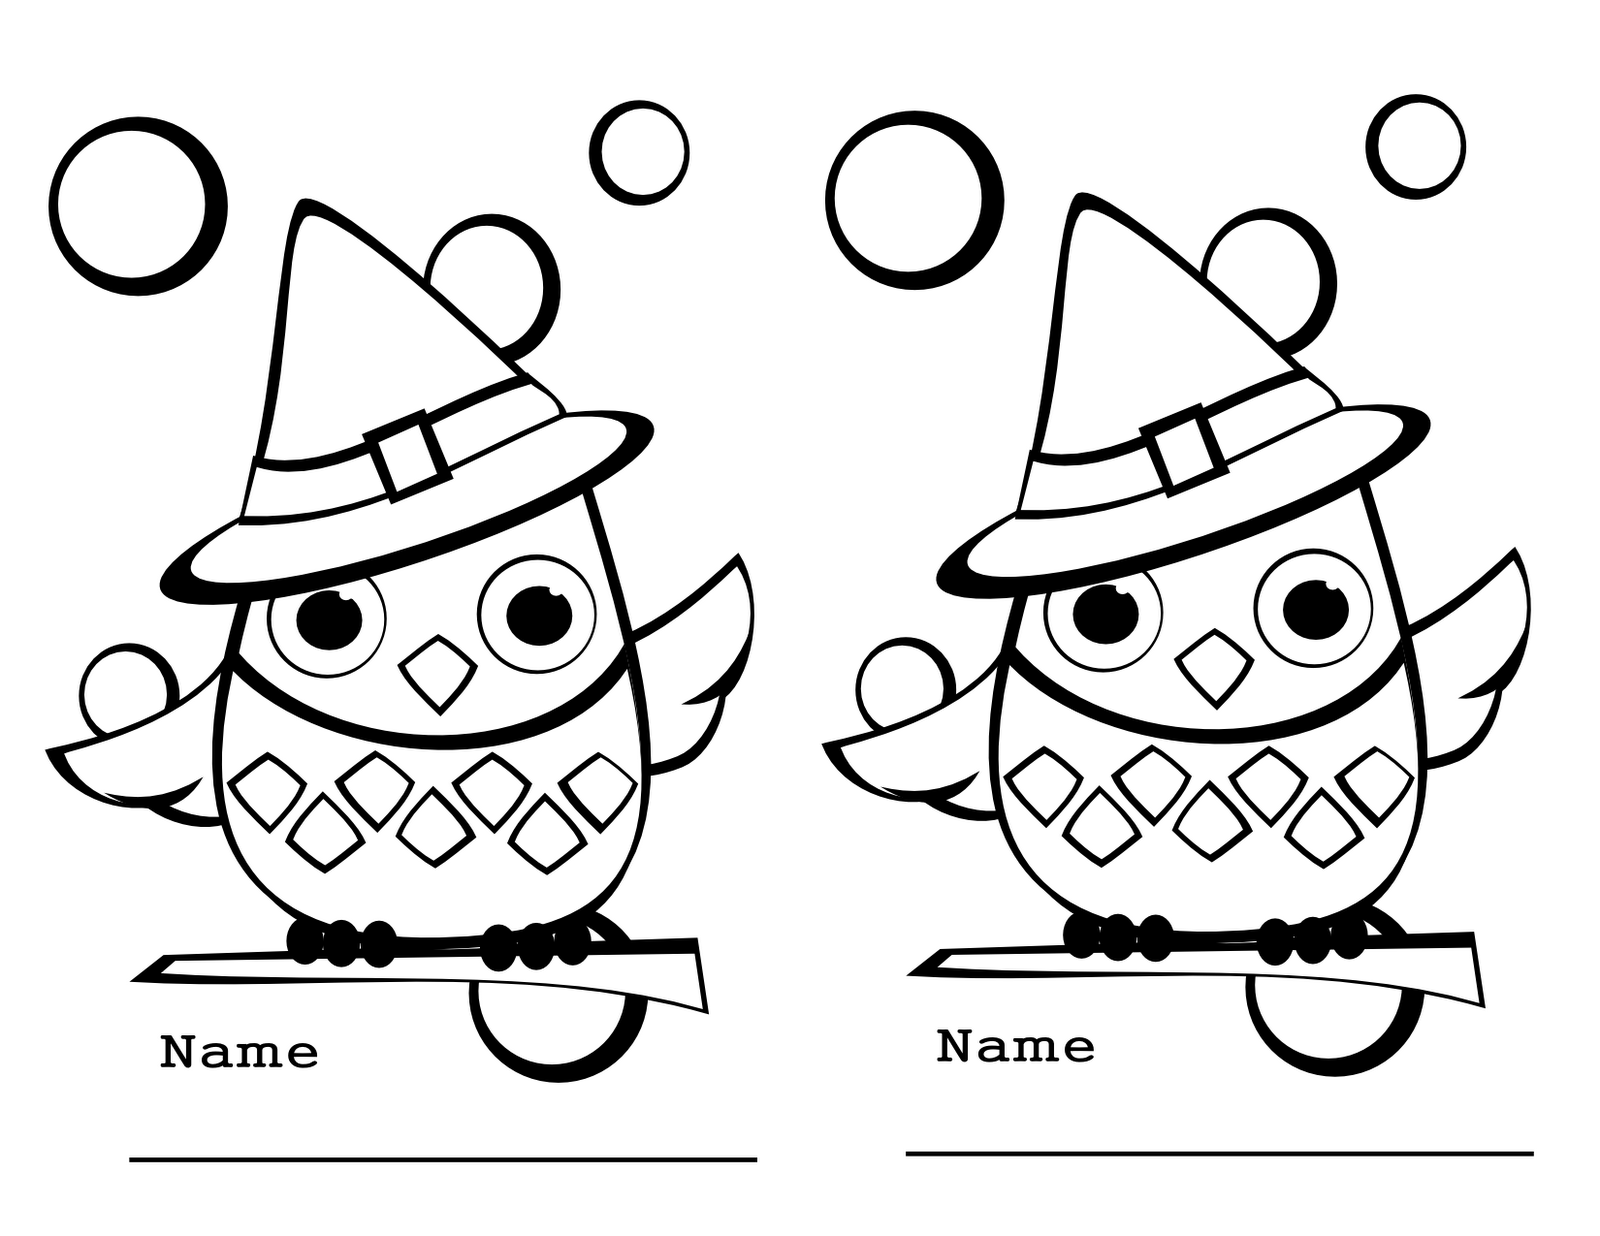 pics of owls to color owl coloring pages all about owl owls to pics of color 